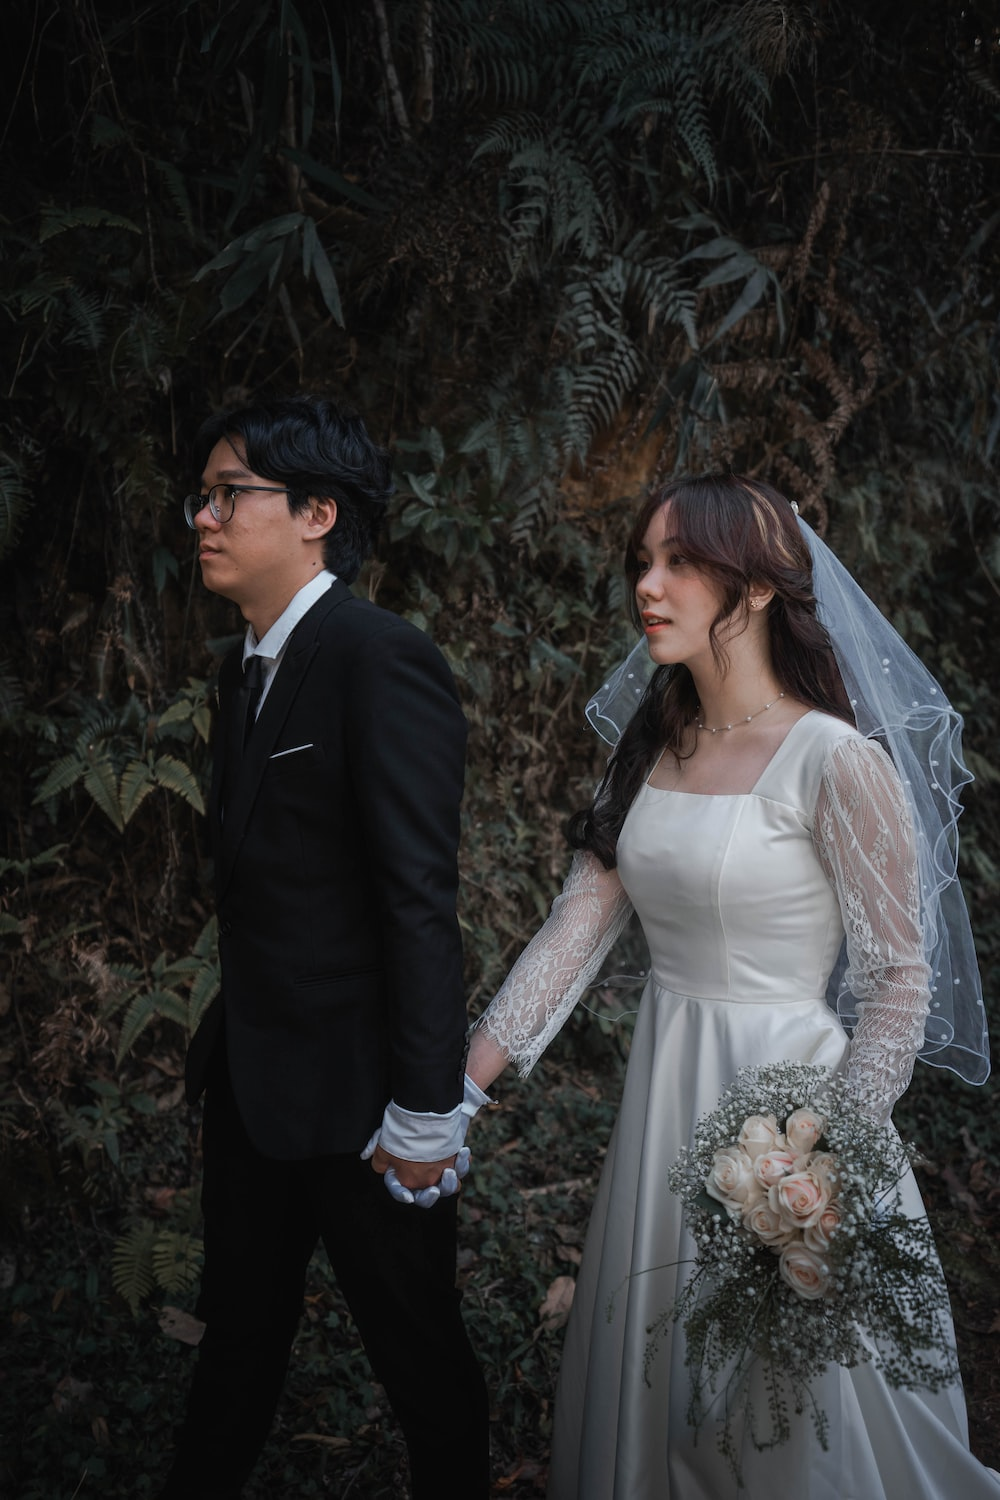 A bride and groom holding hands